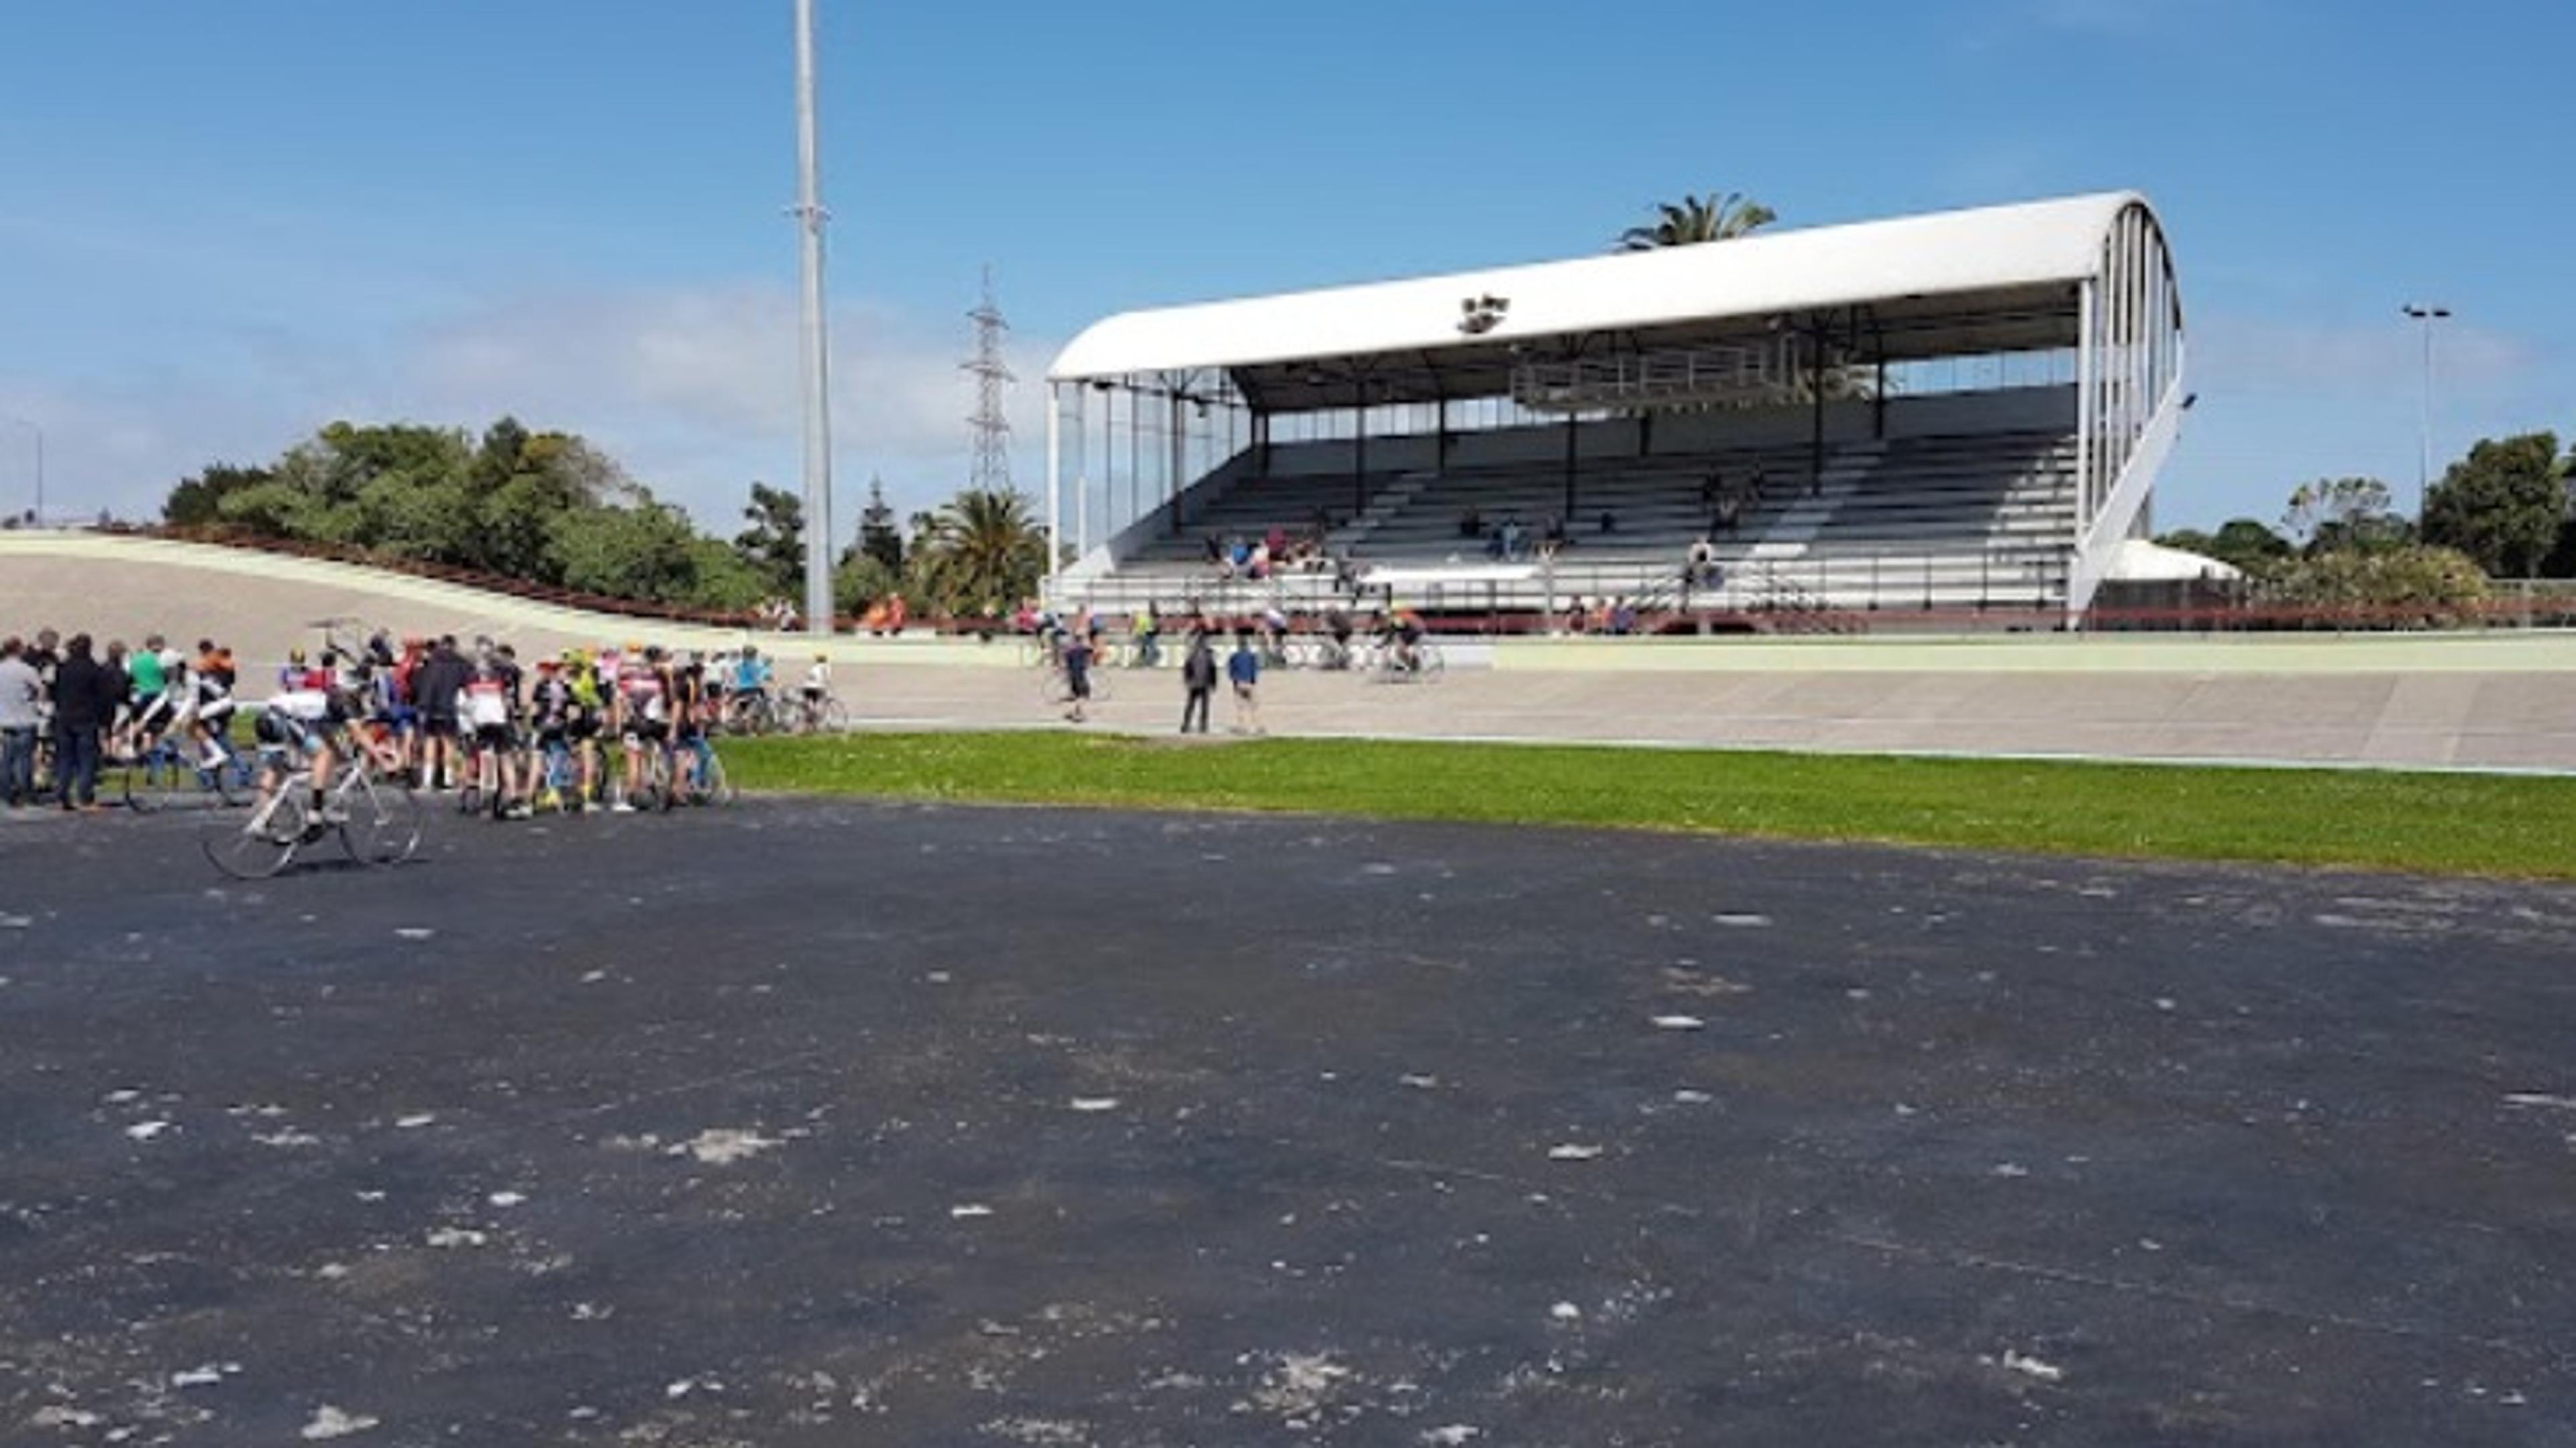 The Manukau Sports Bowl is home to a greyhound racing track, an outdoor cycling velodrome and tennis and basketball courts.